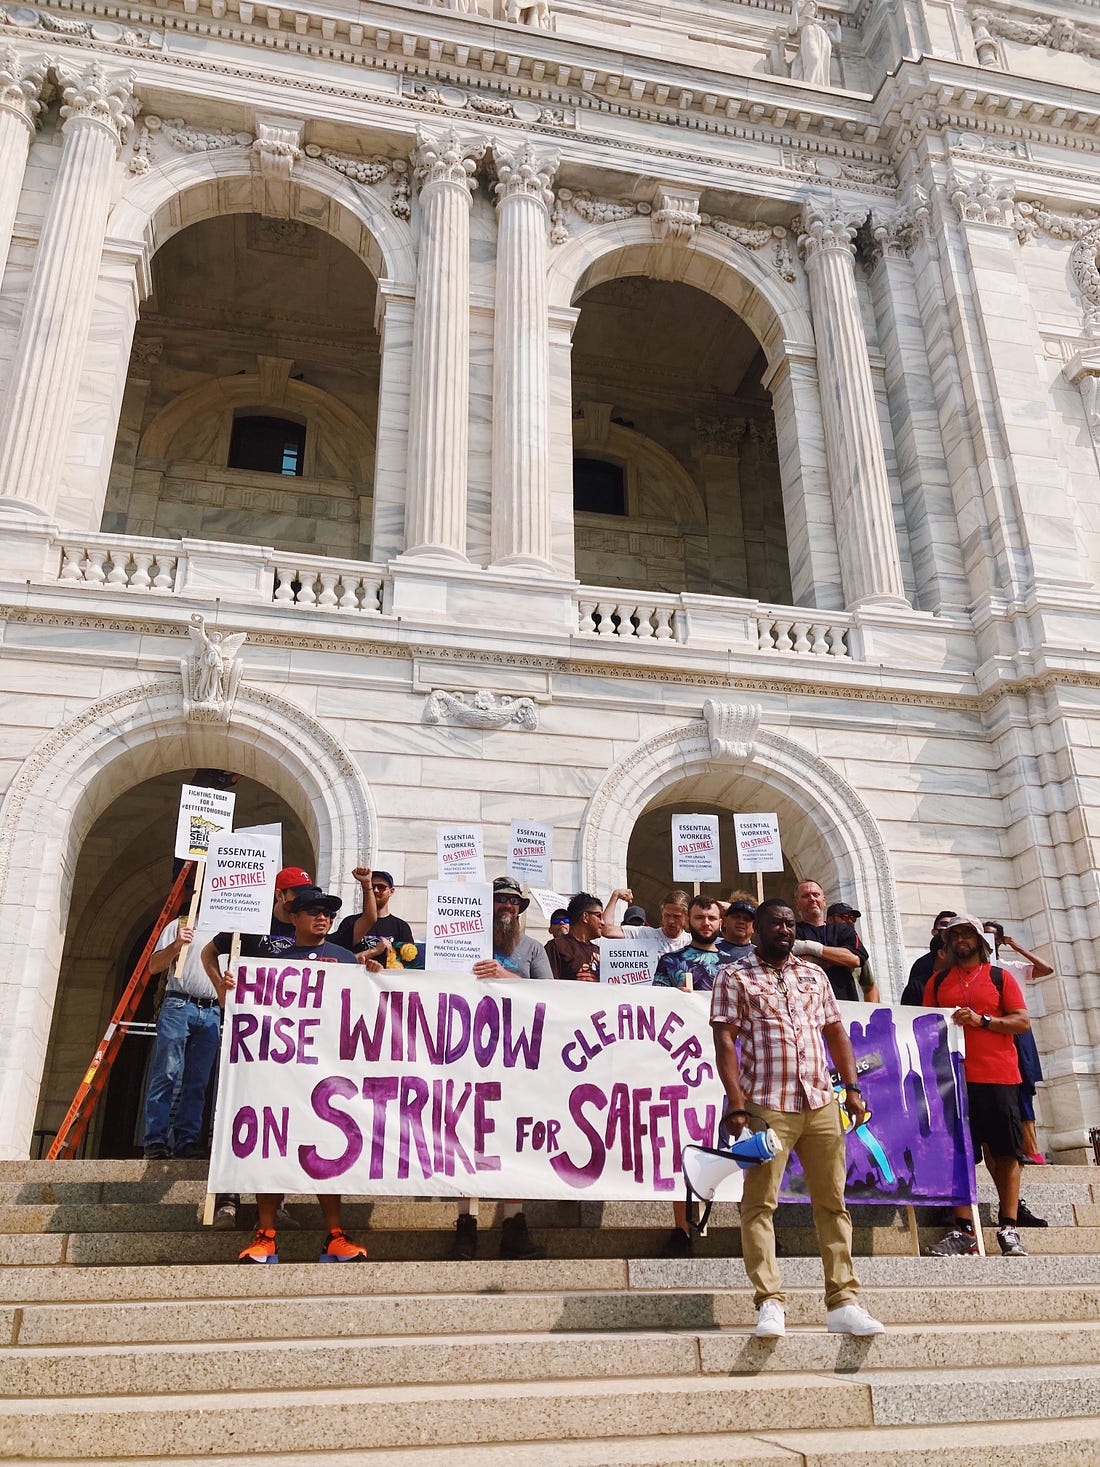 a group of people holding picket signs and a banner reading "high rise window cleaners on strike for safety" in purple letters stand in front of the white marble capitol building steps